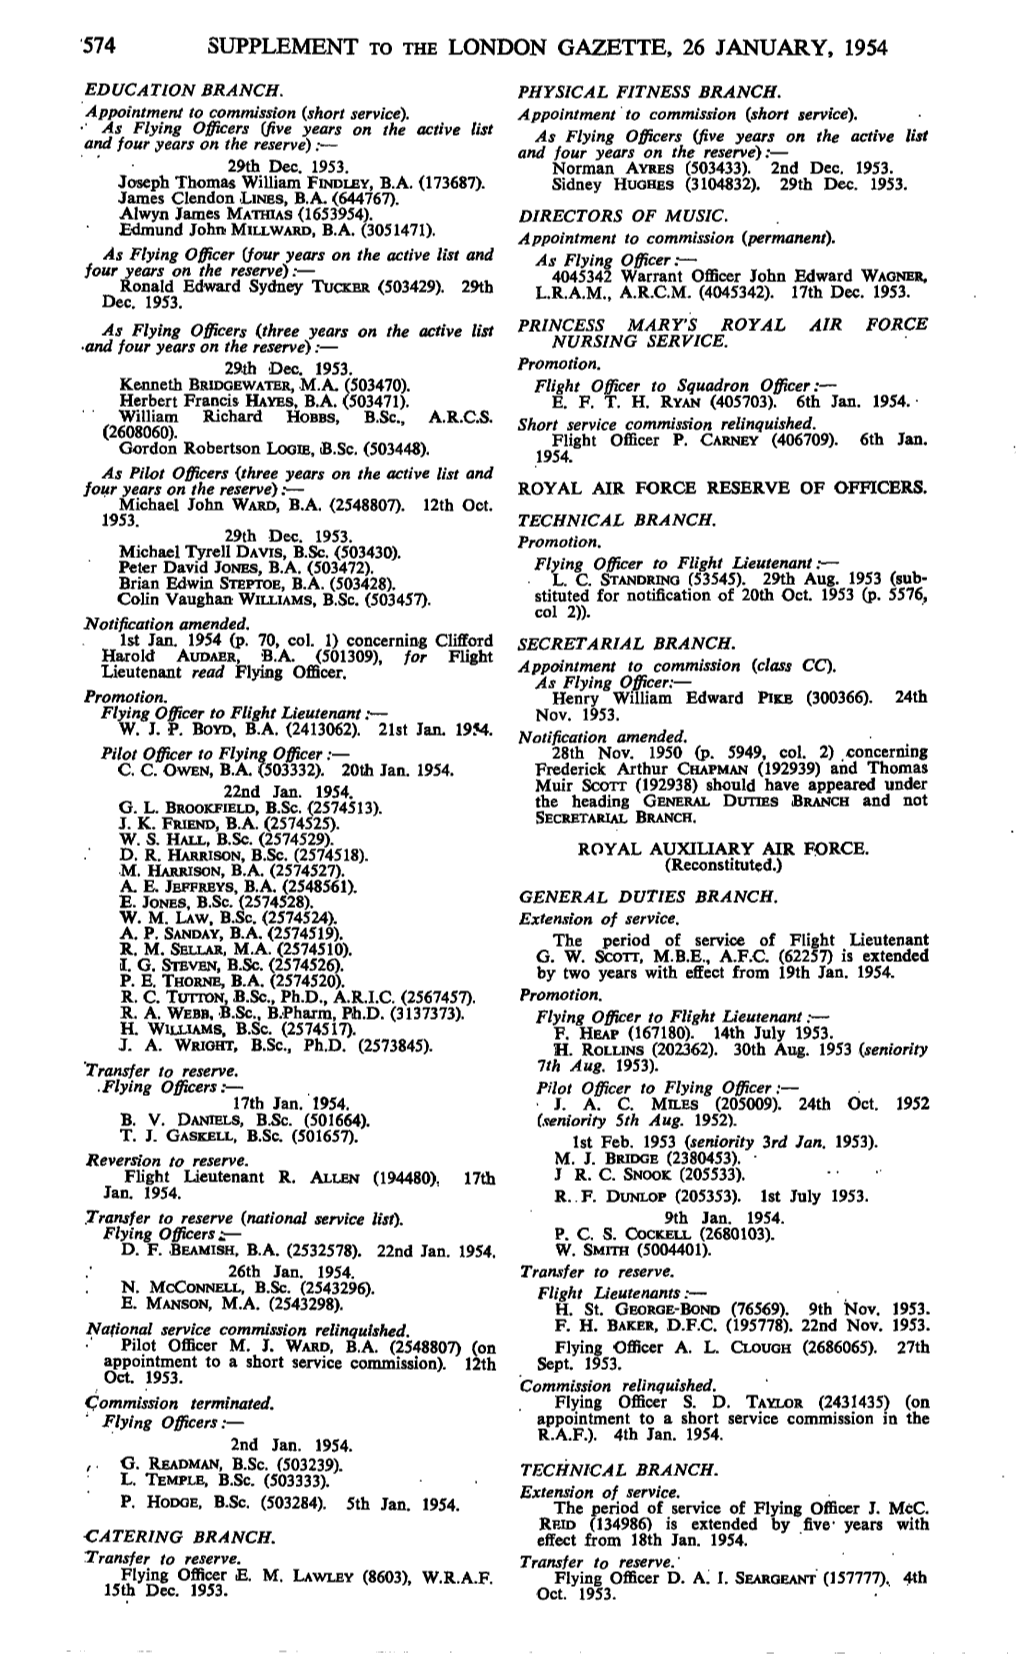 Supplement to the London Gazette, 26 January, 1954